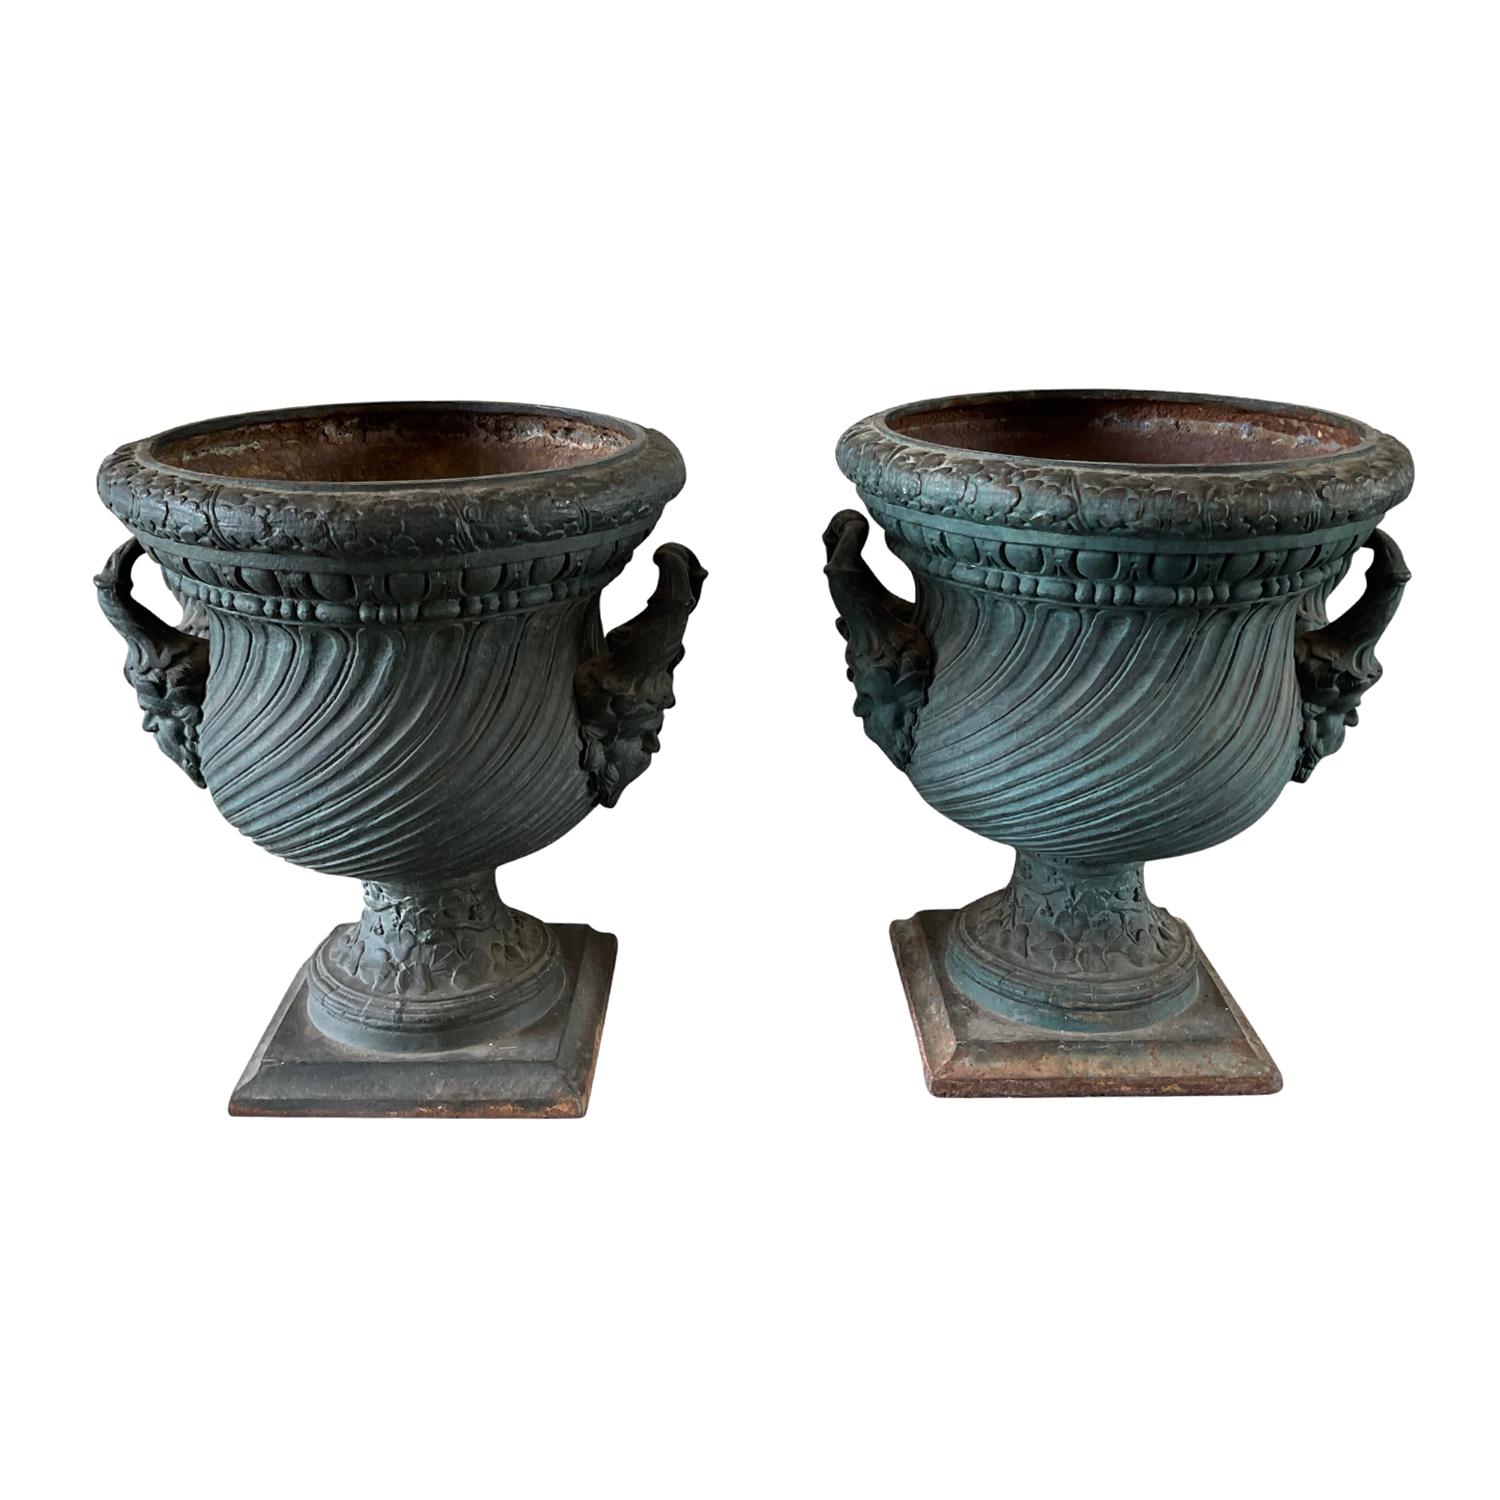 An antique pair of 19th Century heavy garden urns made of hand crafted cast iron, in good condition. The set of French planters are in their raw iron state with few traces of historic paint. The beautifully richly adorned round bodices are flanked